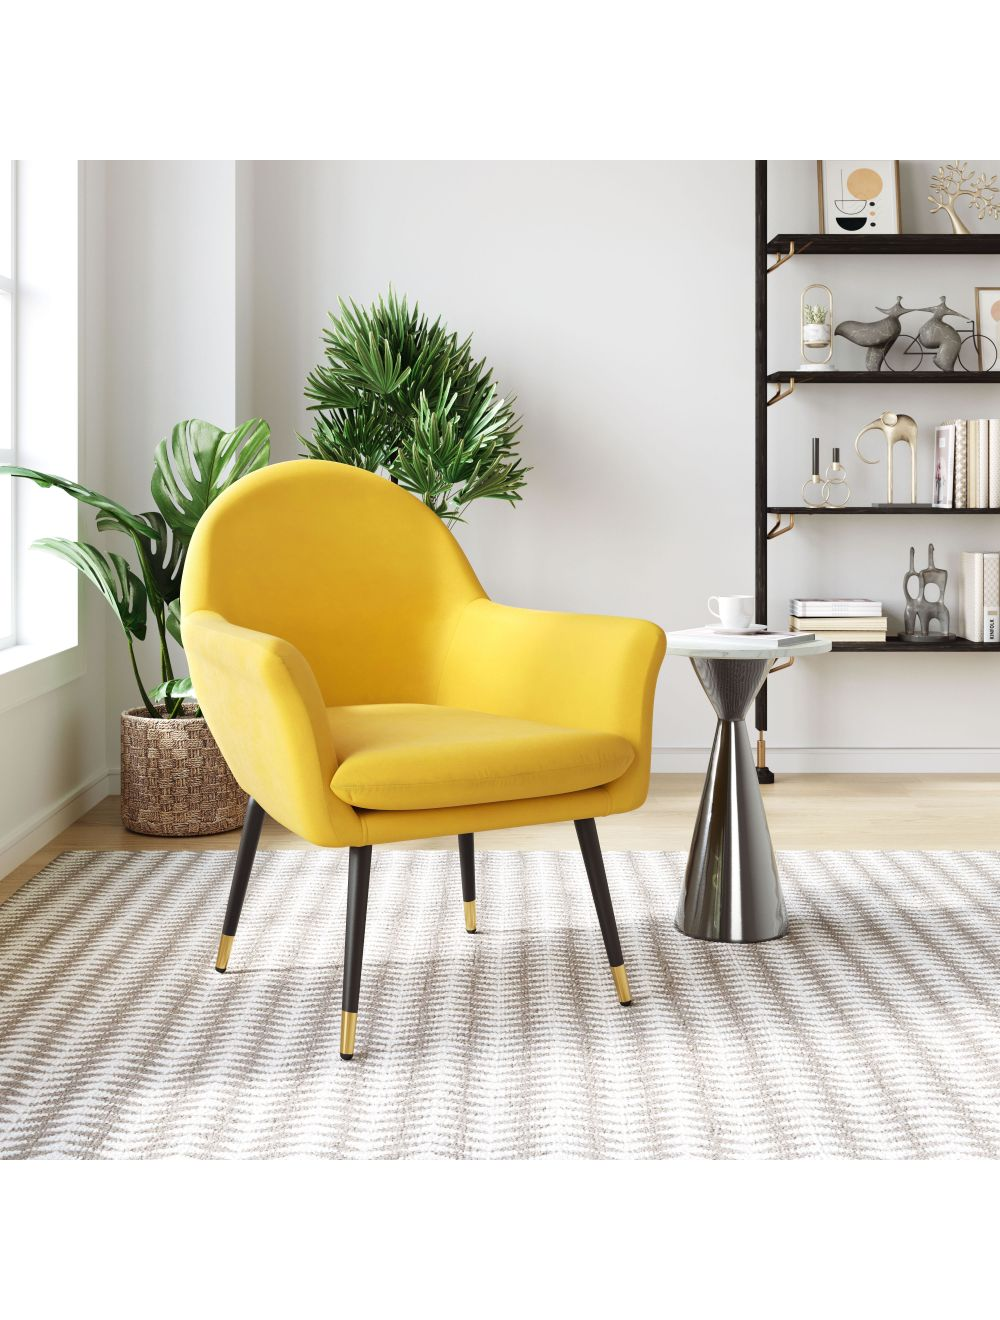 "30"" Yellow And Gold Velvet Arm Chair"